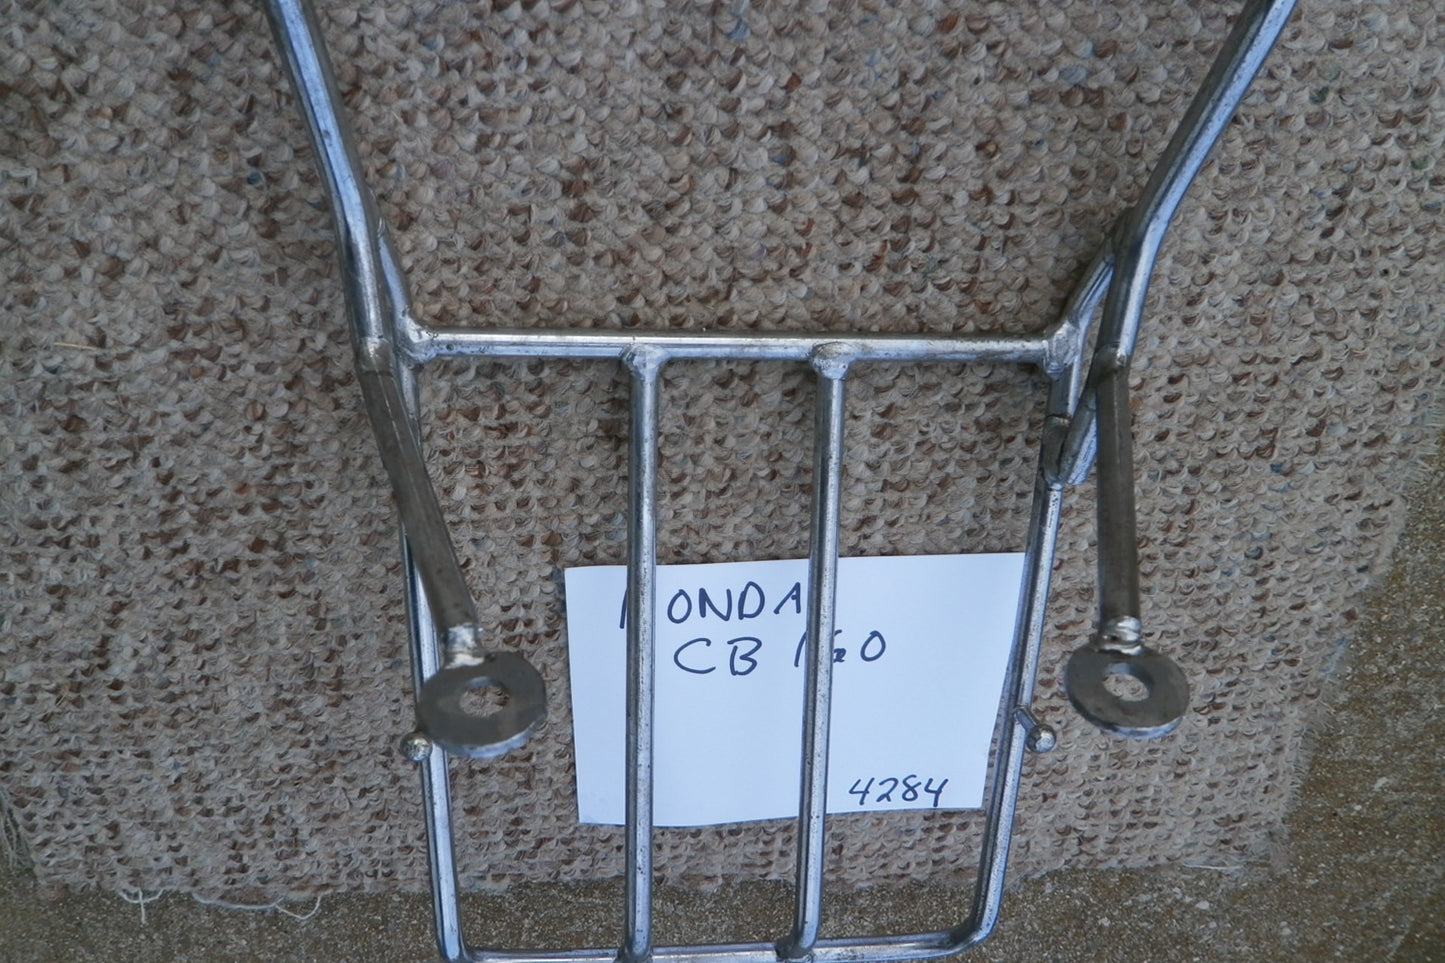 Sold 7/28/25 By Invoice Honda CB160 Luggage Rack 4298